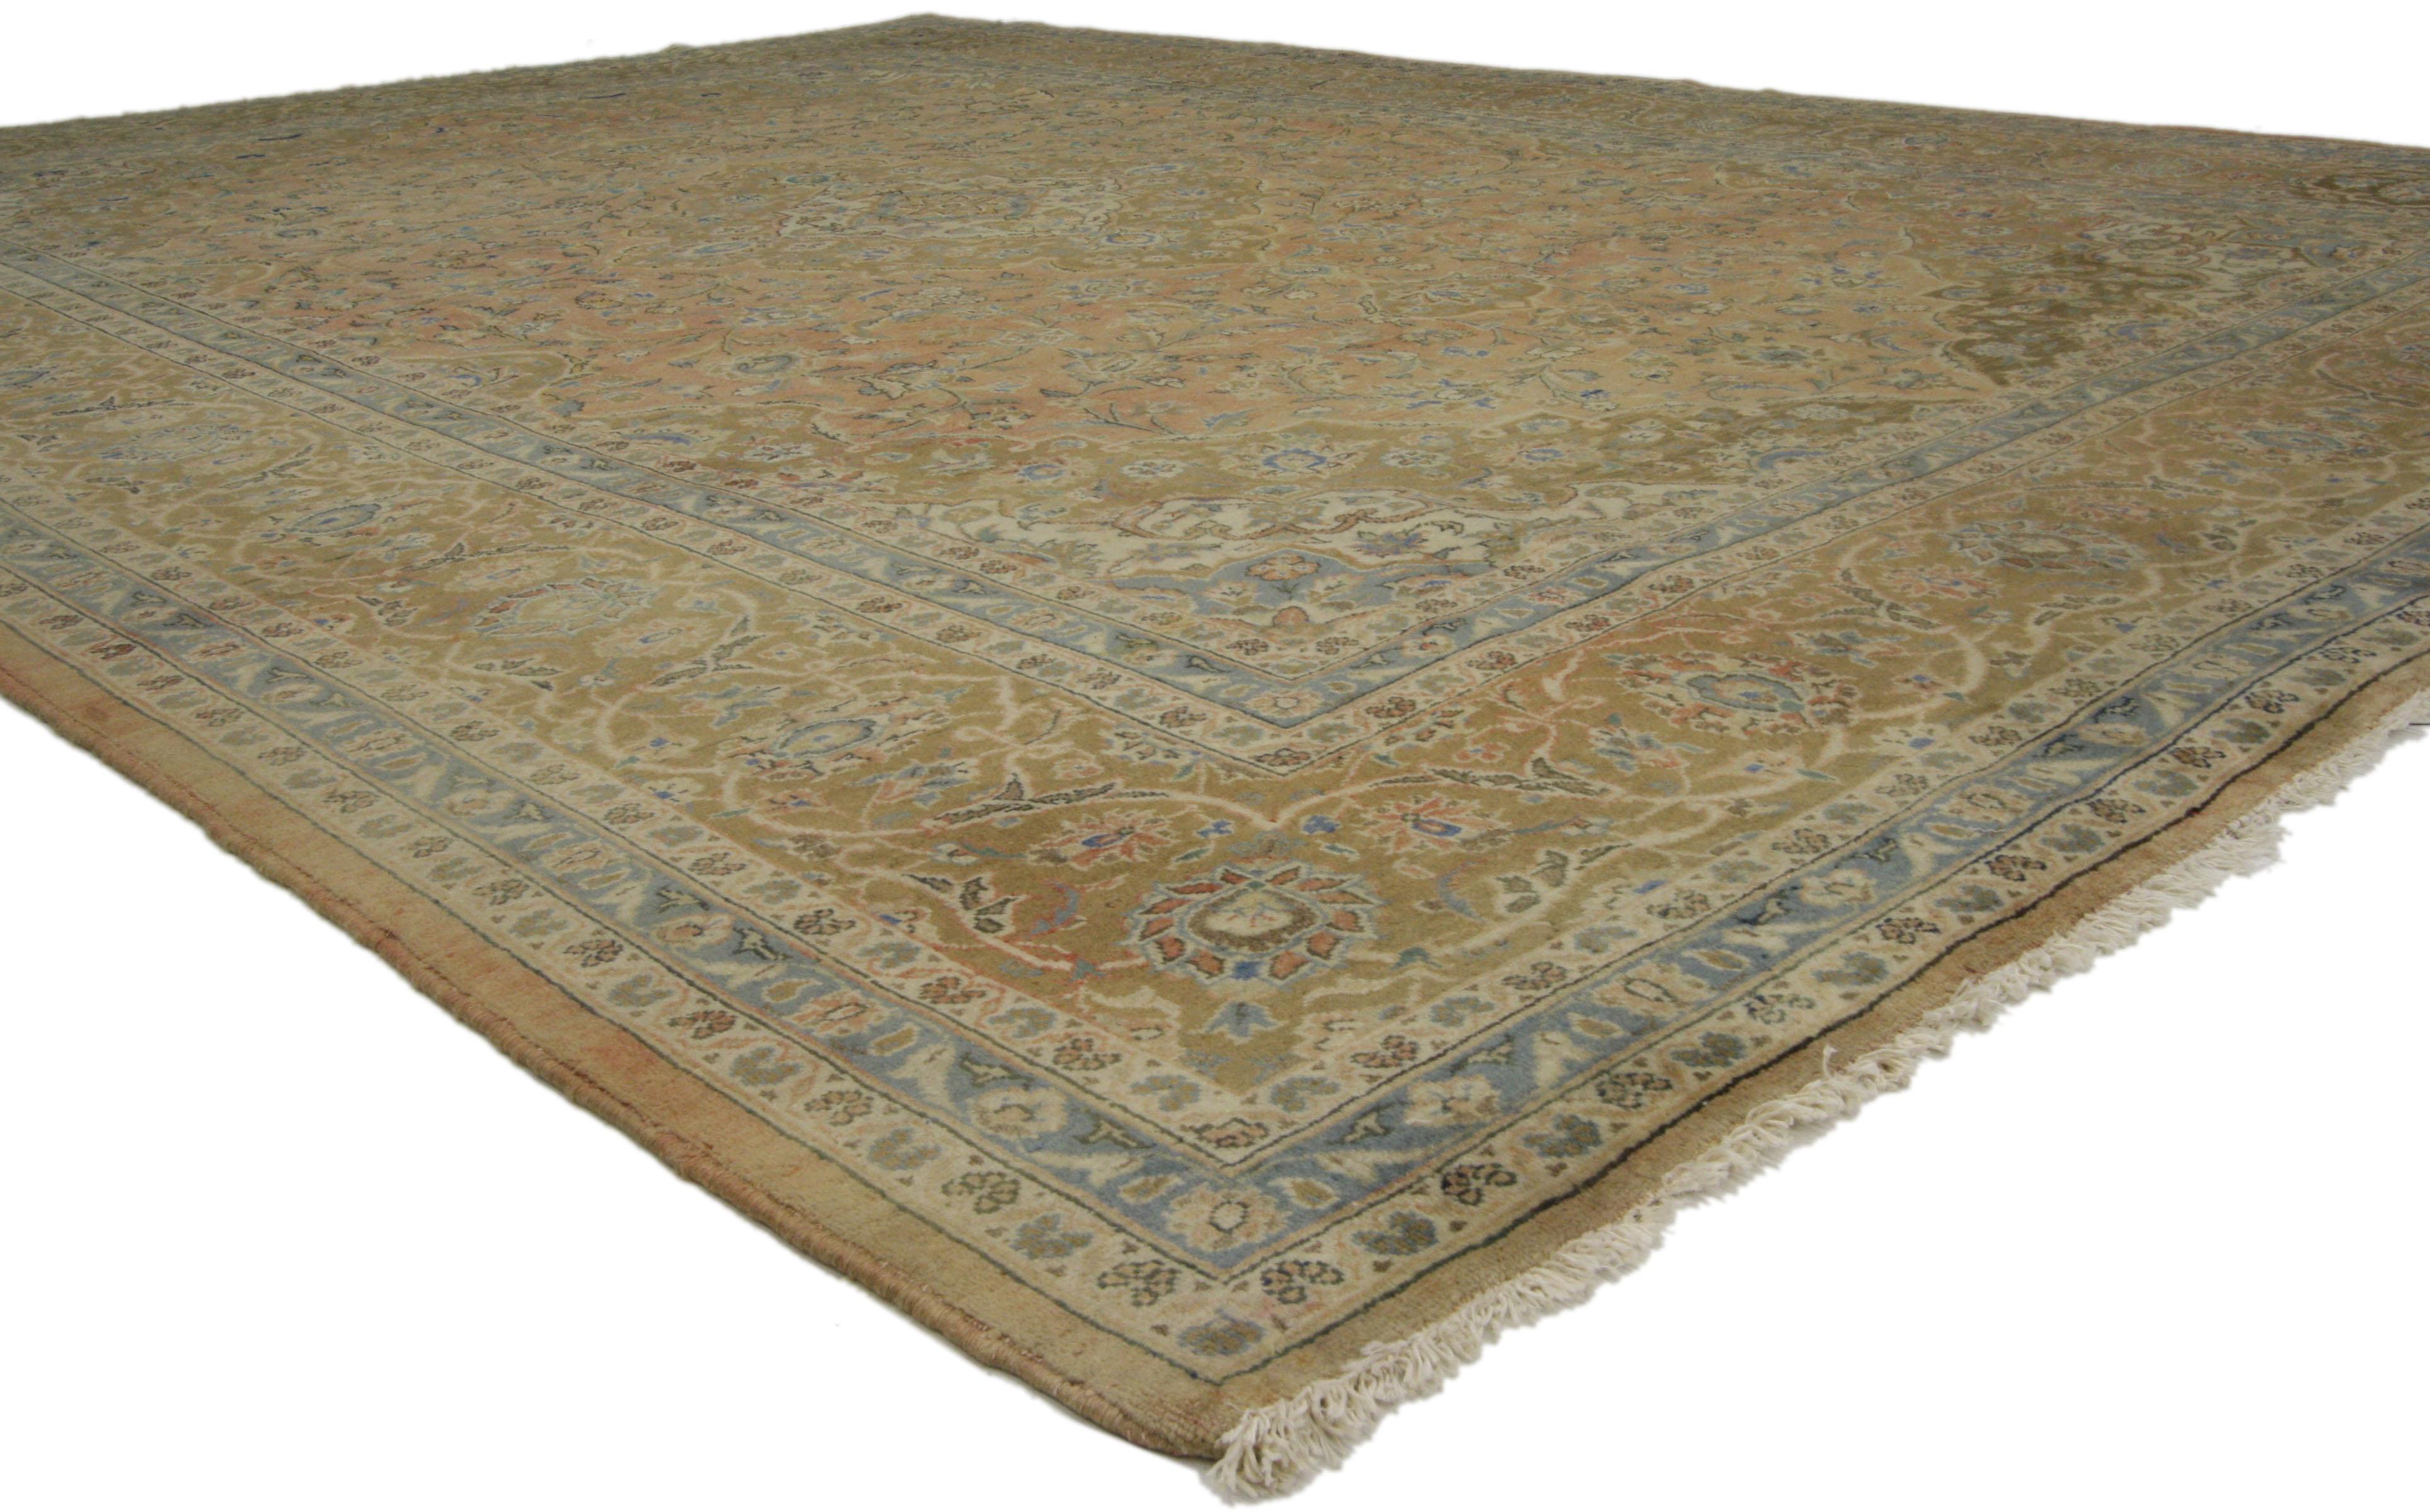 76494 Vintage Persian Khorassan Rug, 08'03 X 11'04.
Warm decadence meets nostalgic charm in this vintage Persian Khorassan rug. The intricate botanical design and pastel earthy hues woven into this piece work together creating a sophisticated yet